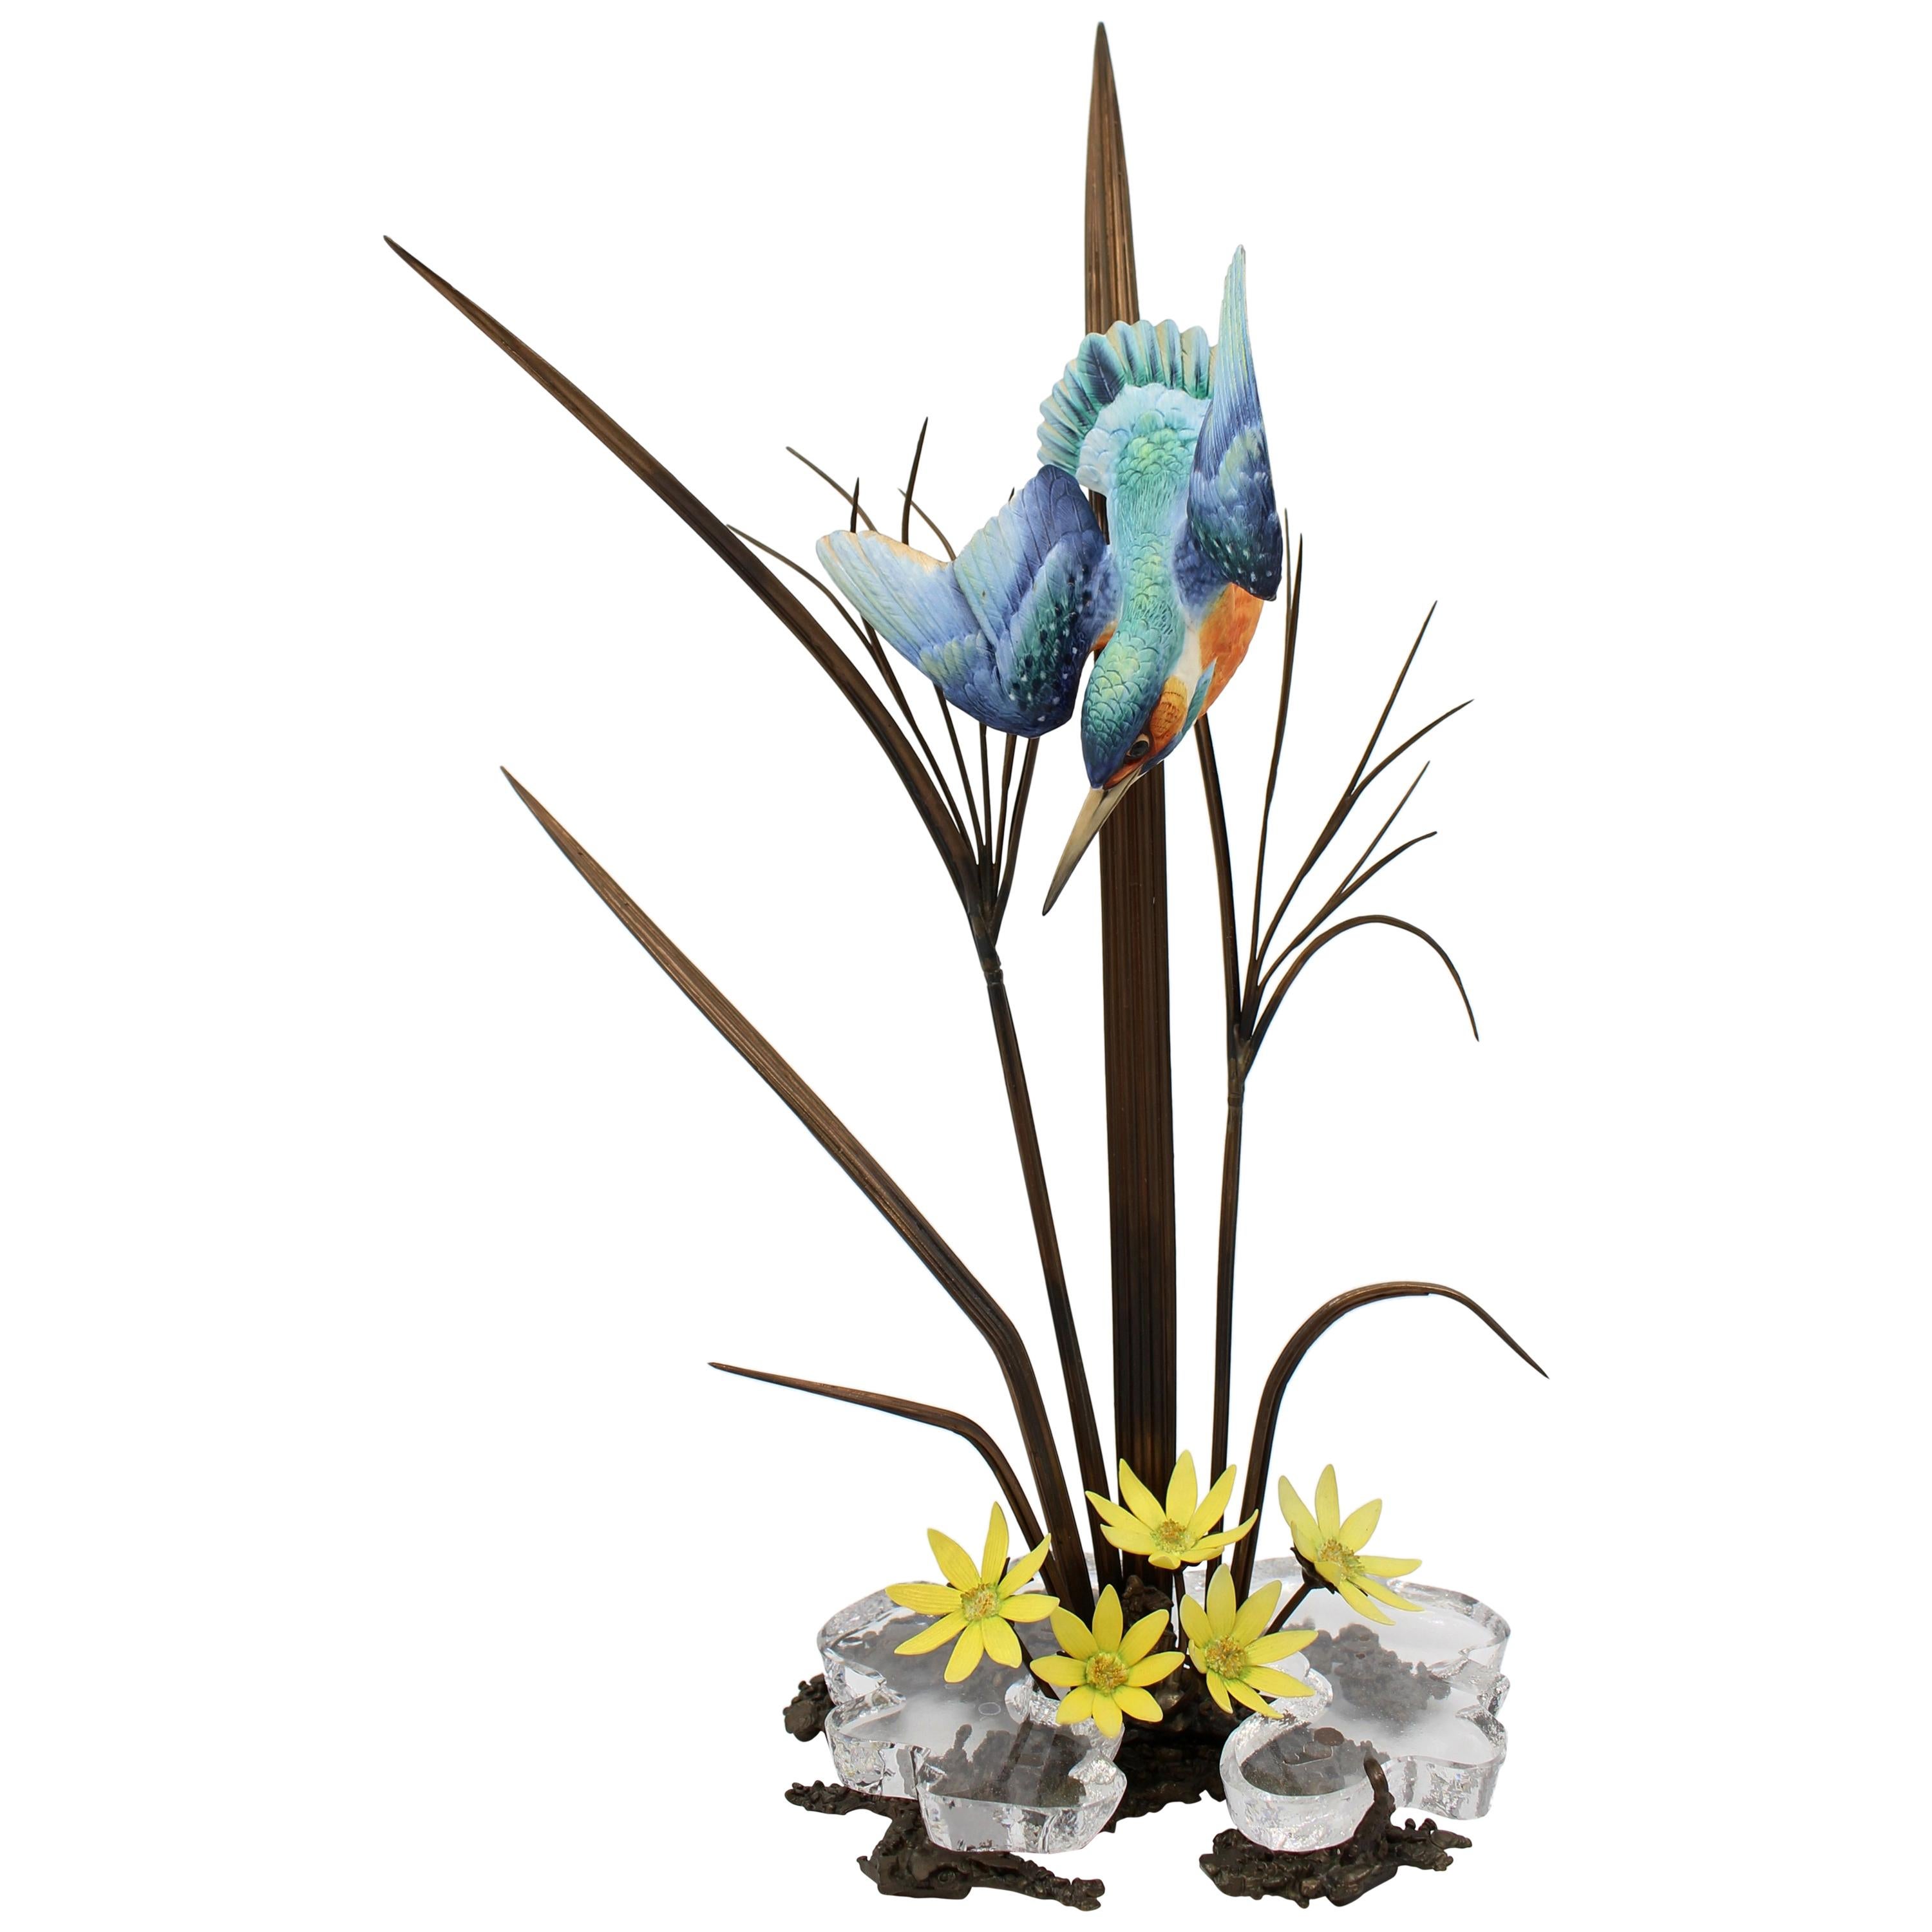 Albany Kingfisher Sculpture Porcelain Bronze and Rock Crystal